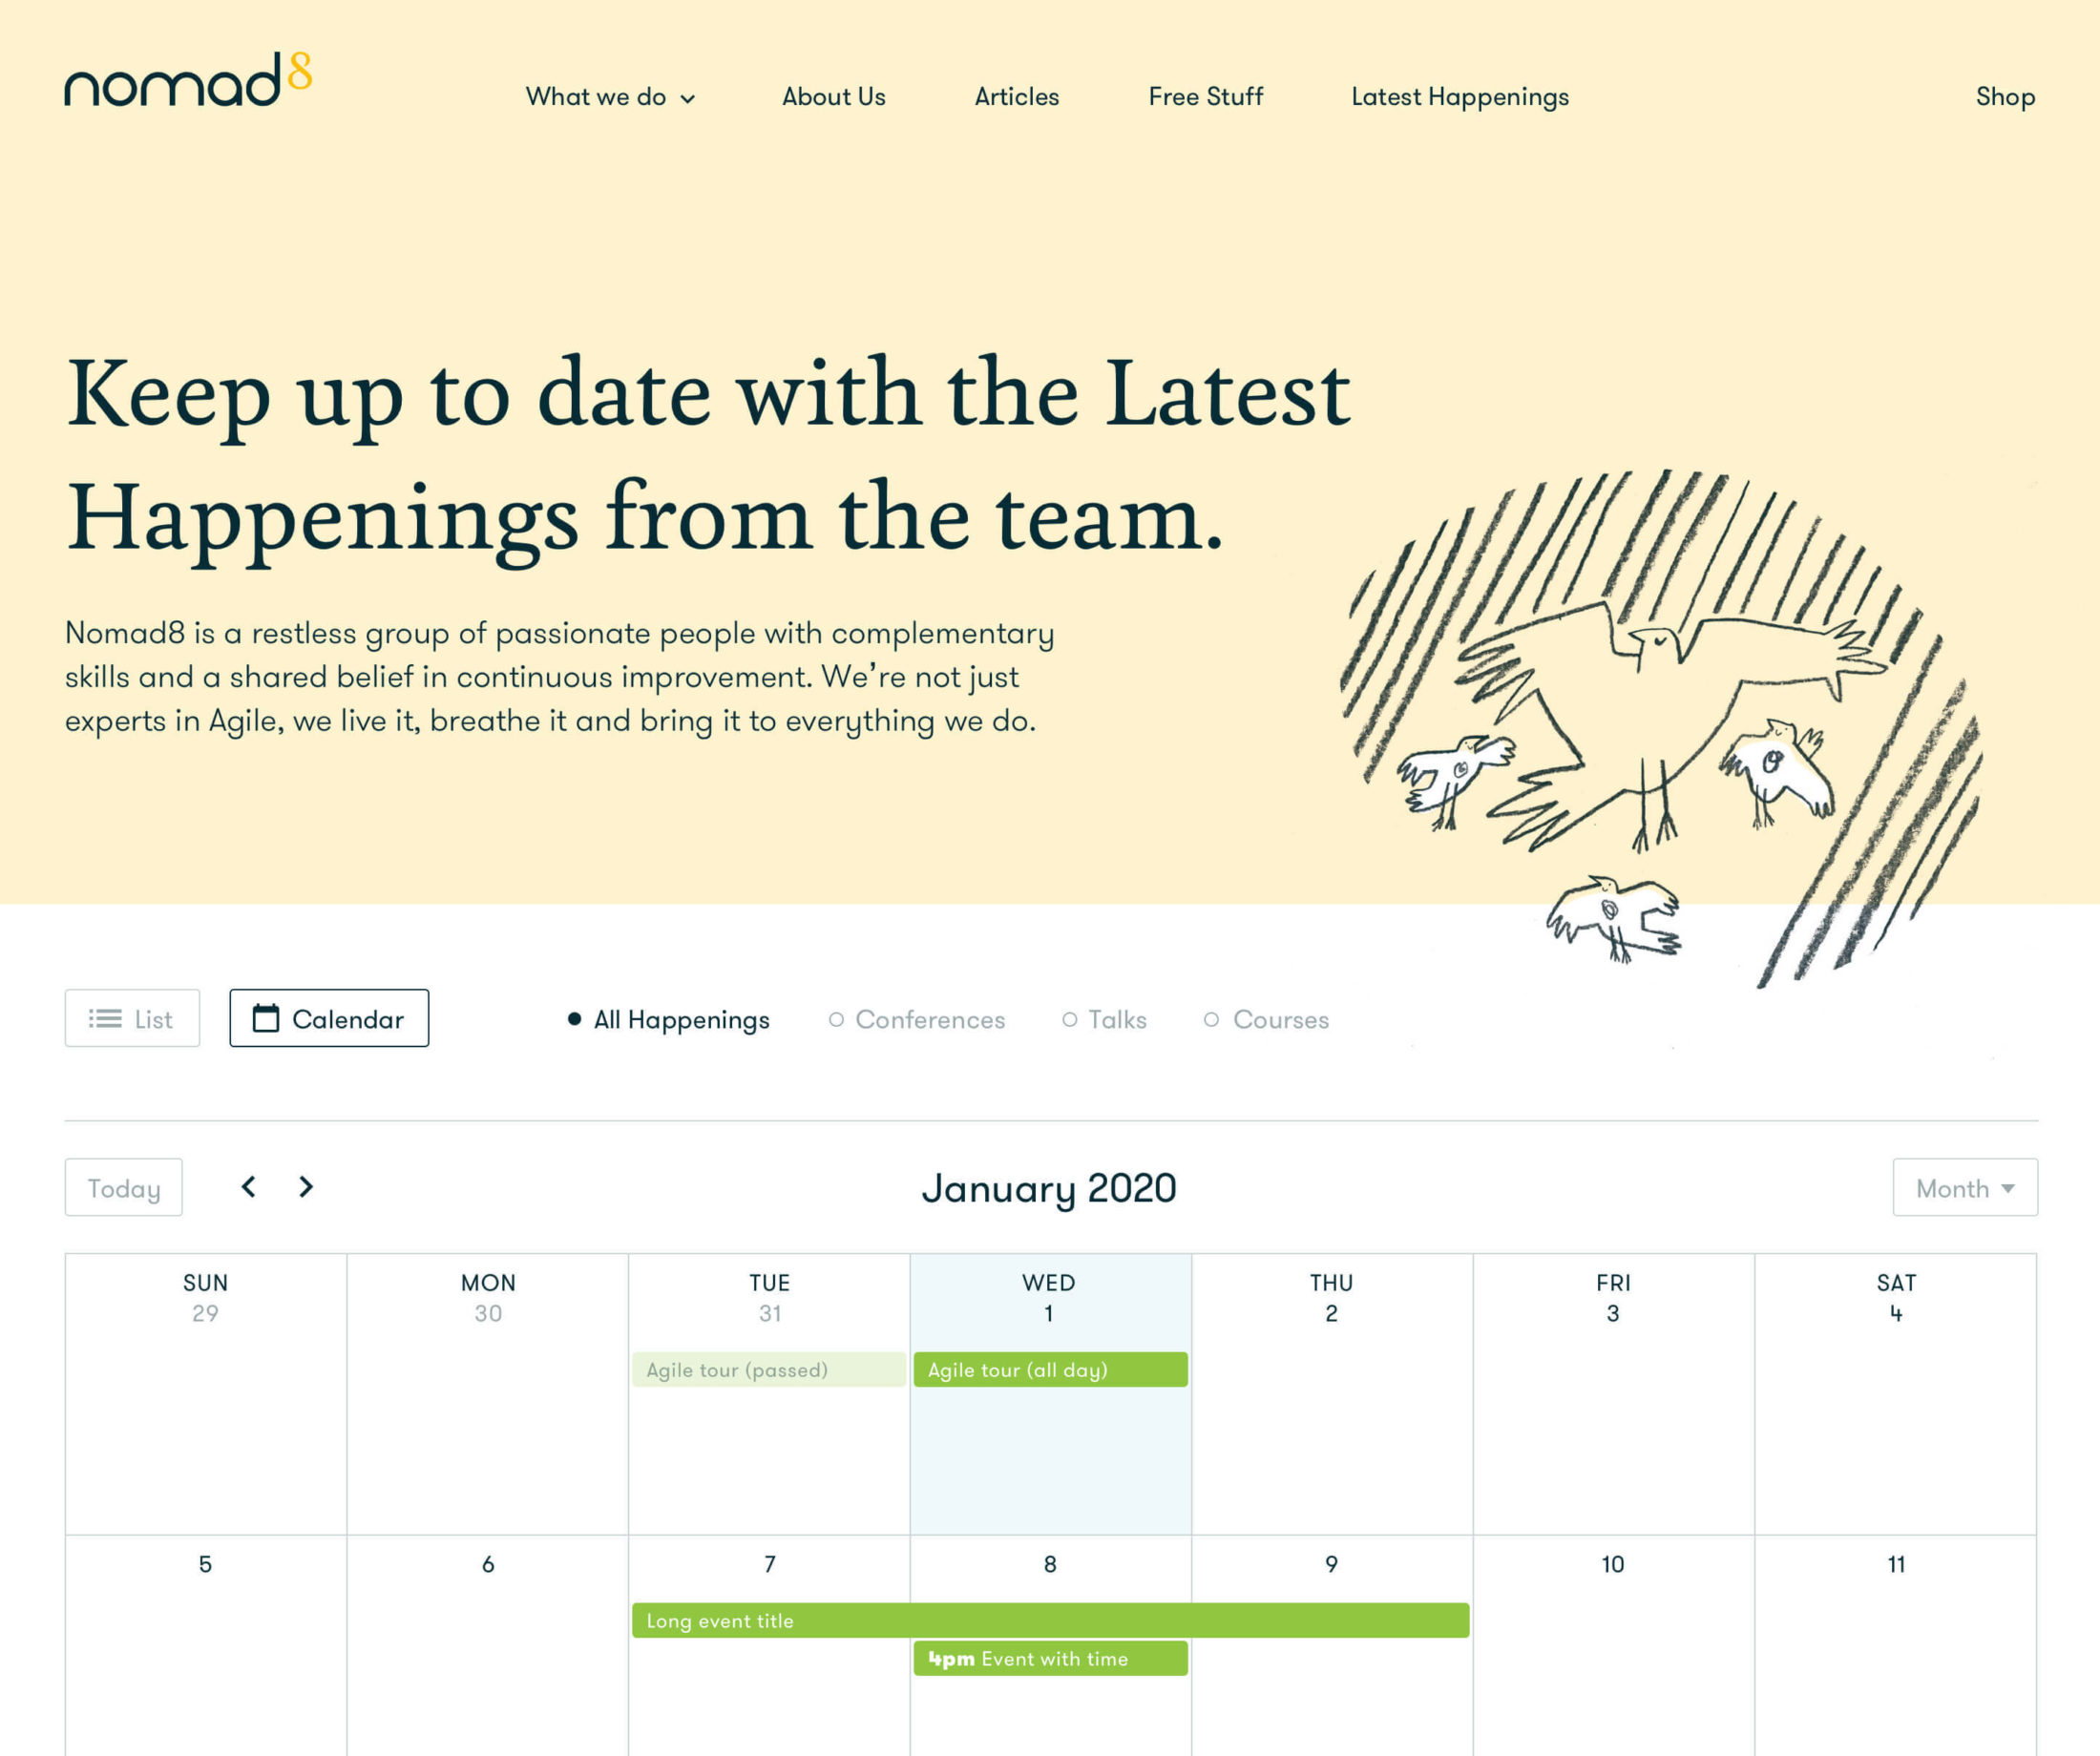 Nomad8 brand and Website